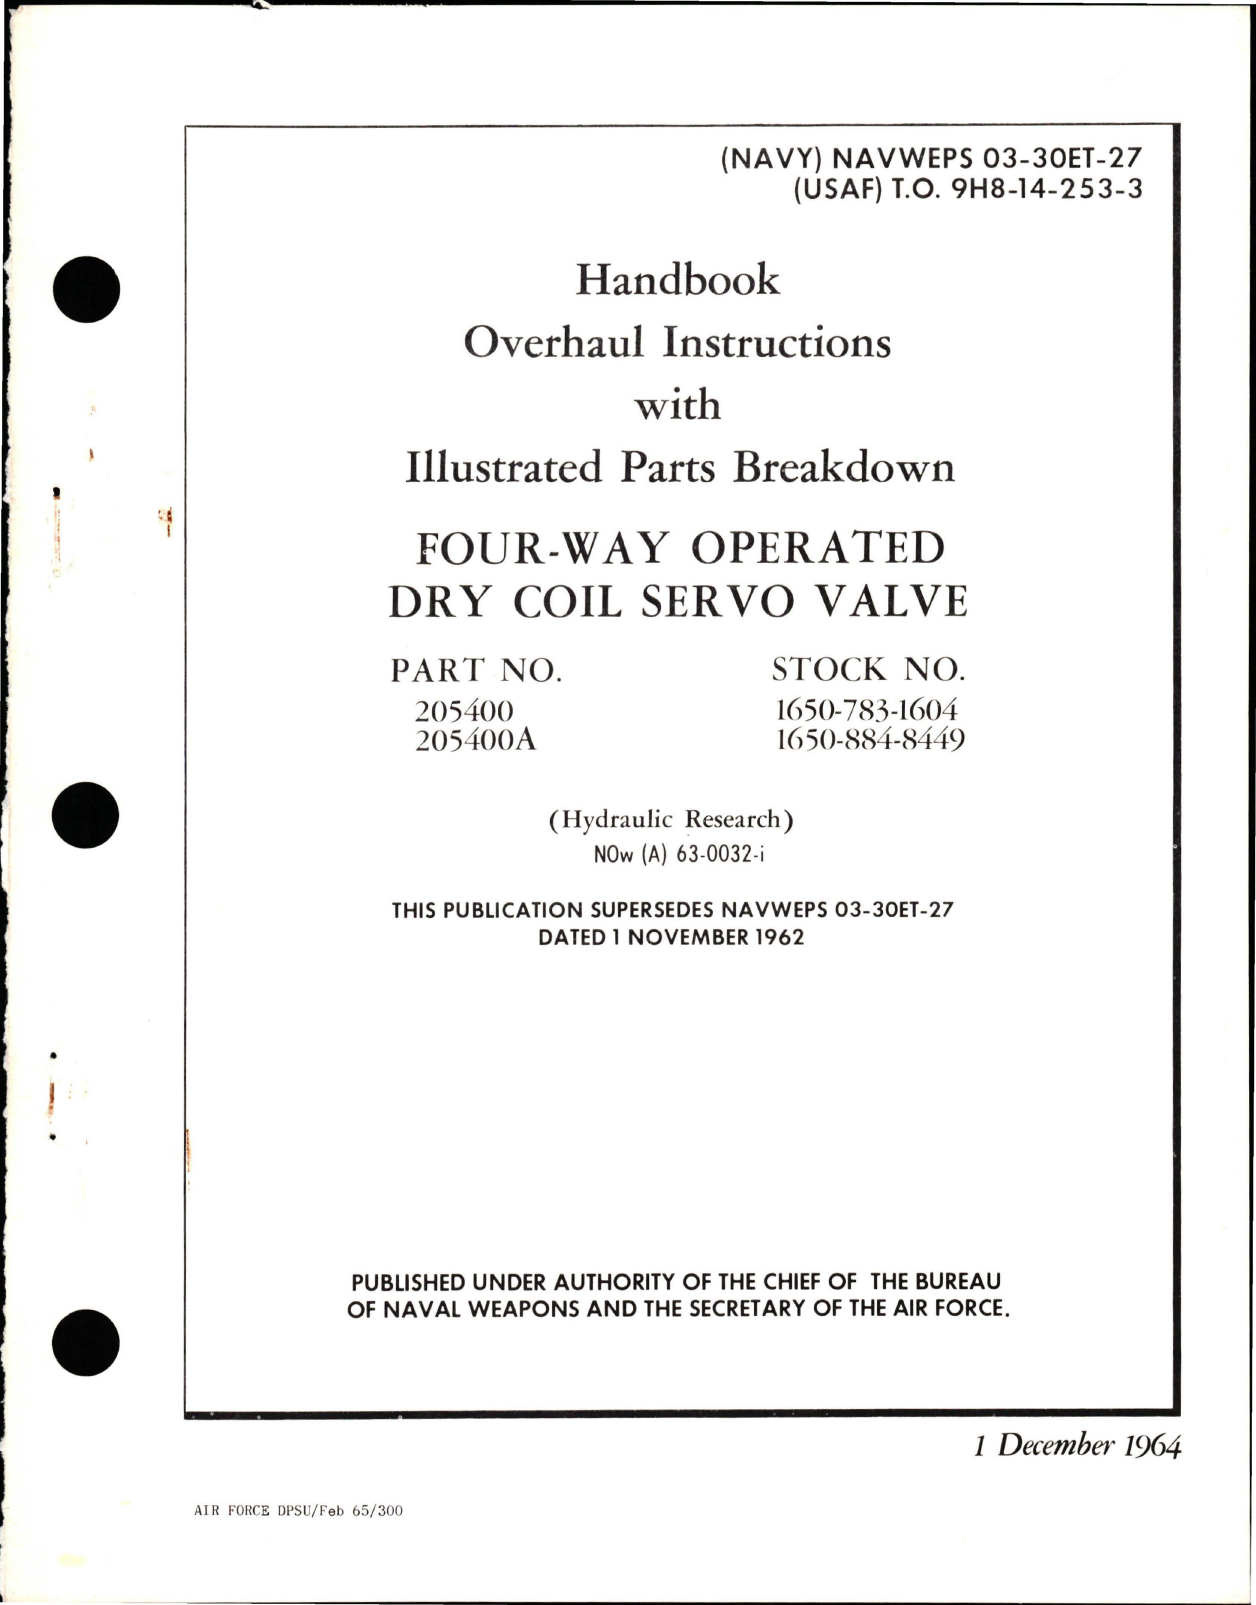 Sample page 1 from AirCorps Library document: Overhaul Instructions with Illustrated Parts for Four-Way Operated Dry Coil Servo Valve - Parts 205400 and 205400A